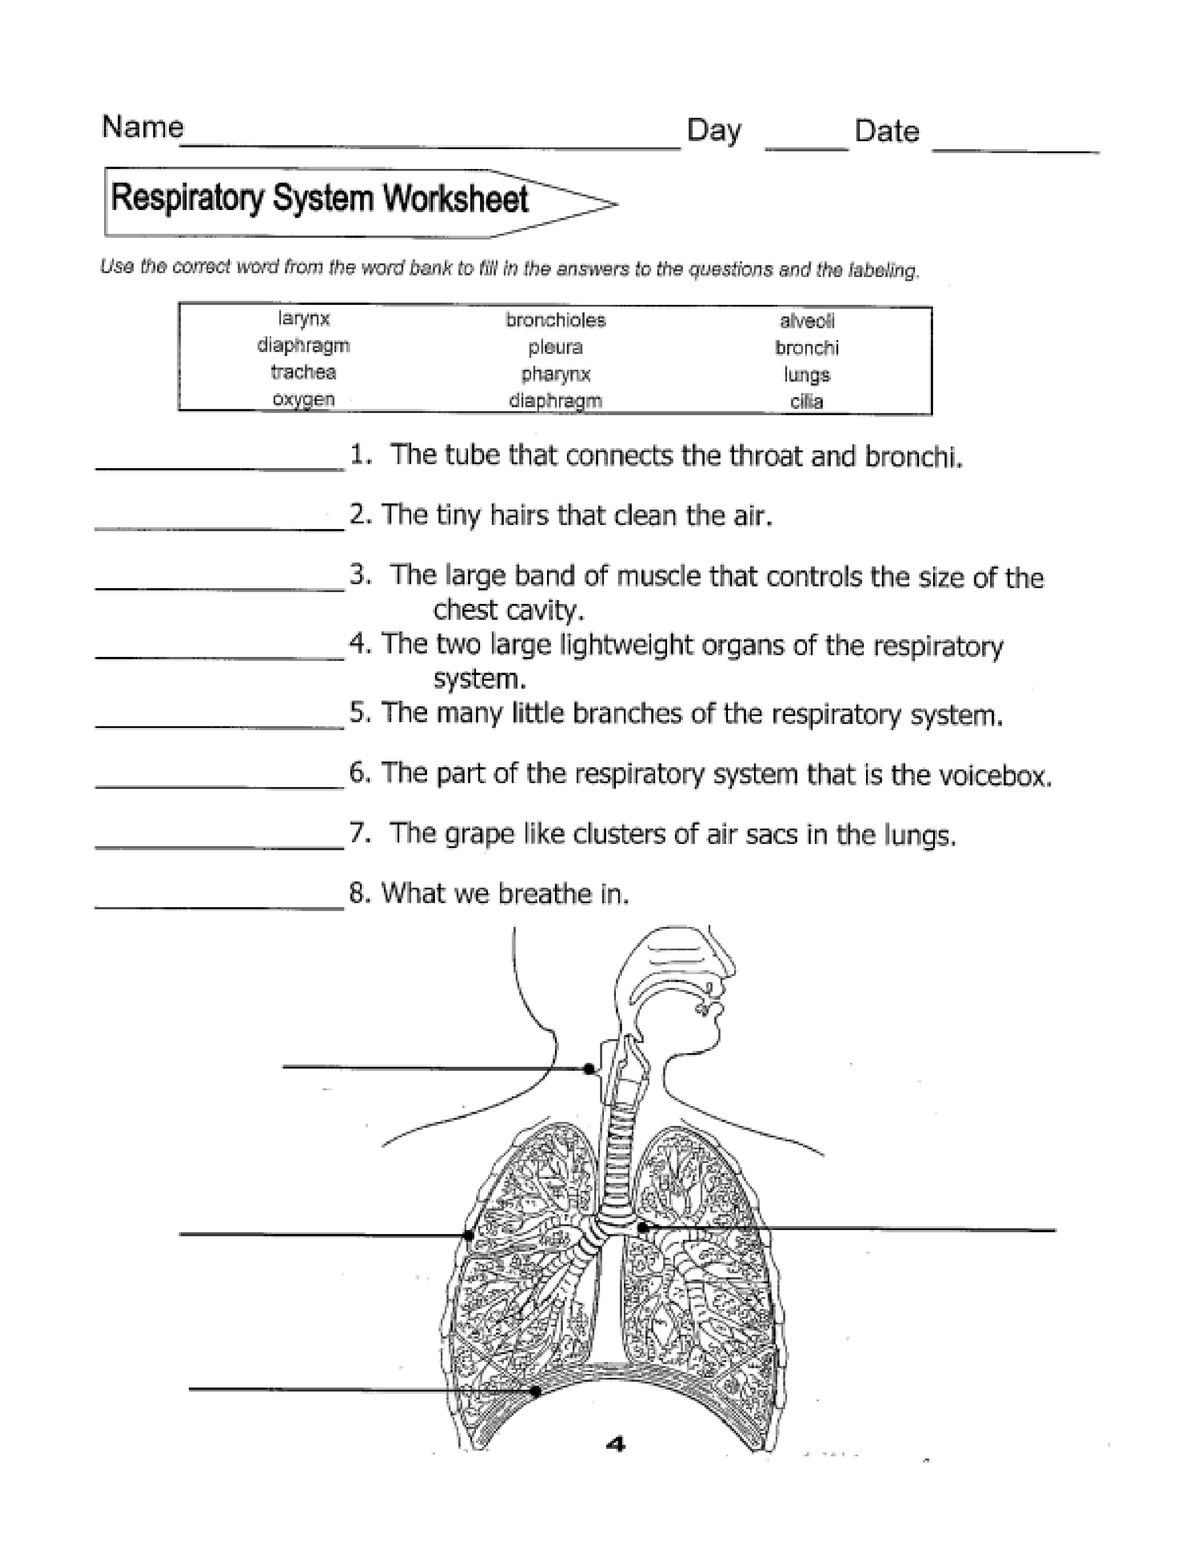 critical thinking questions about respiratory system